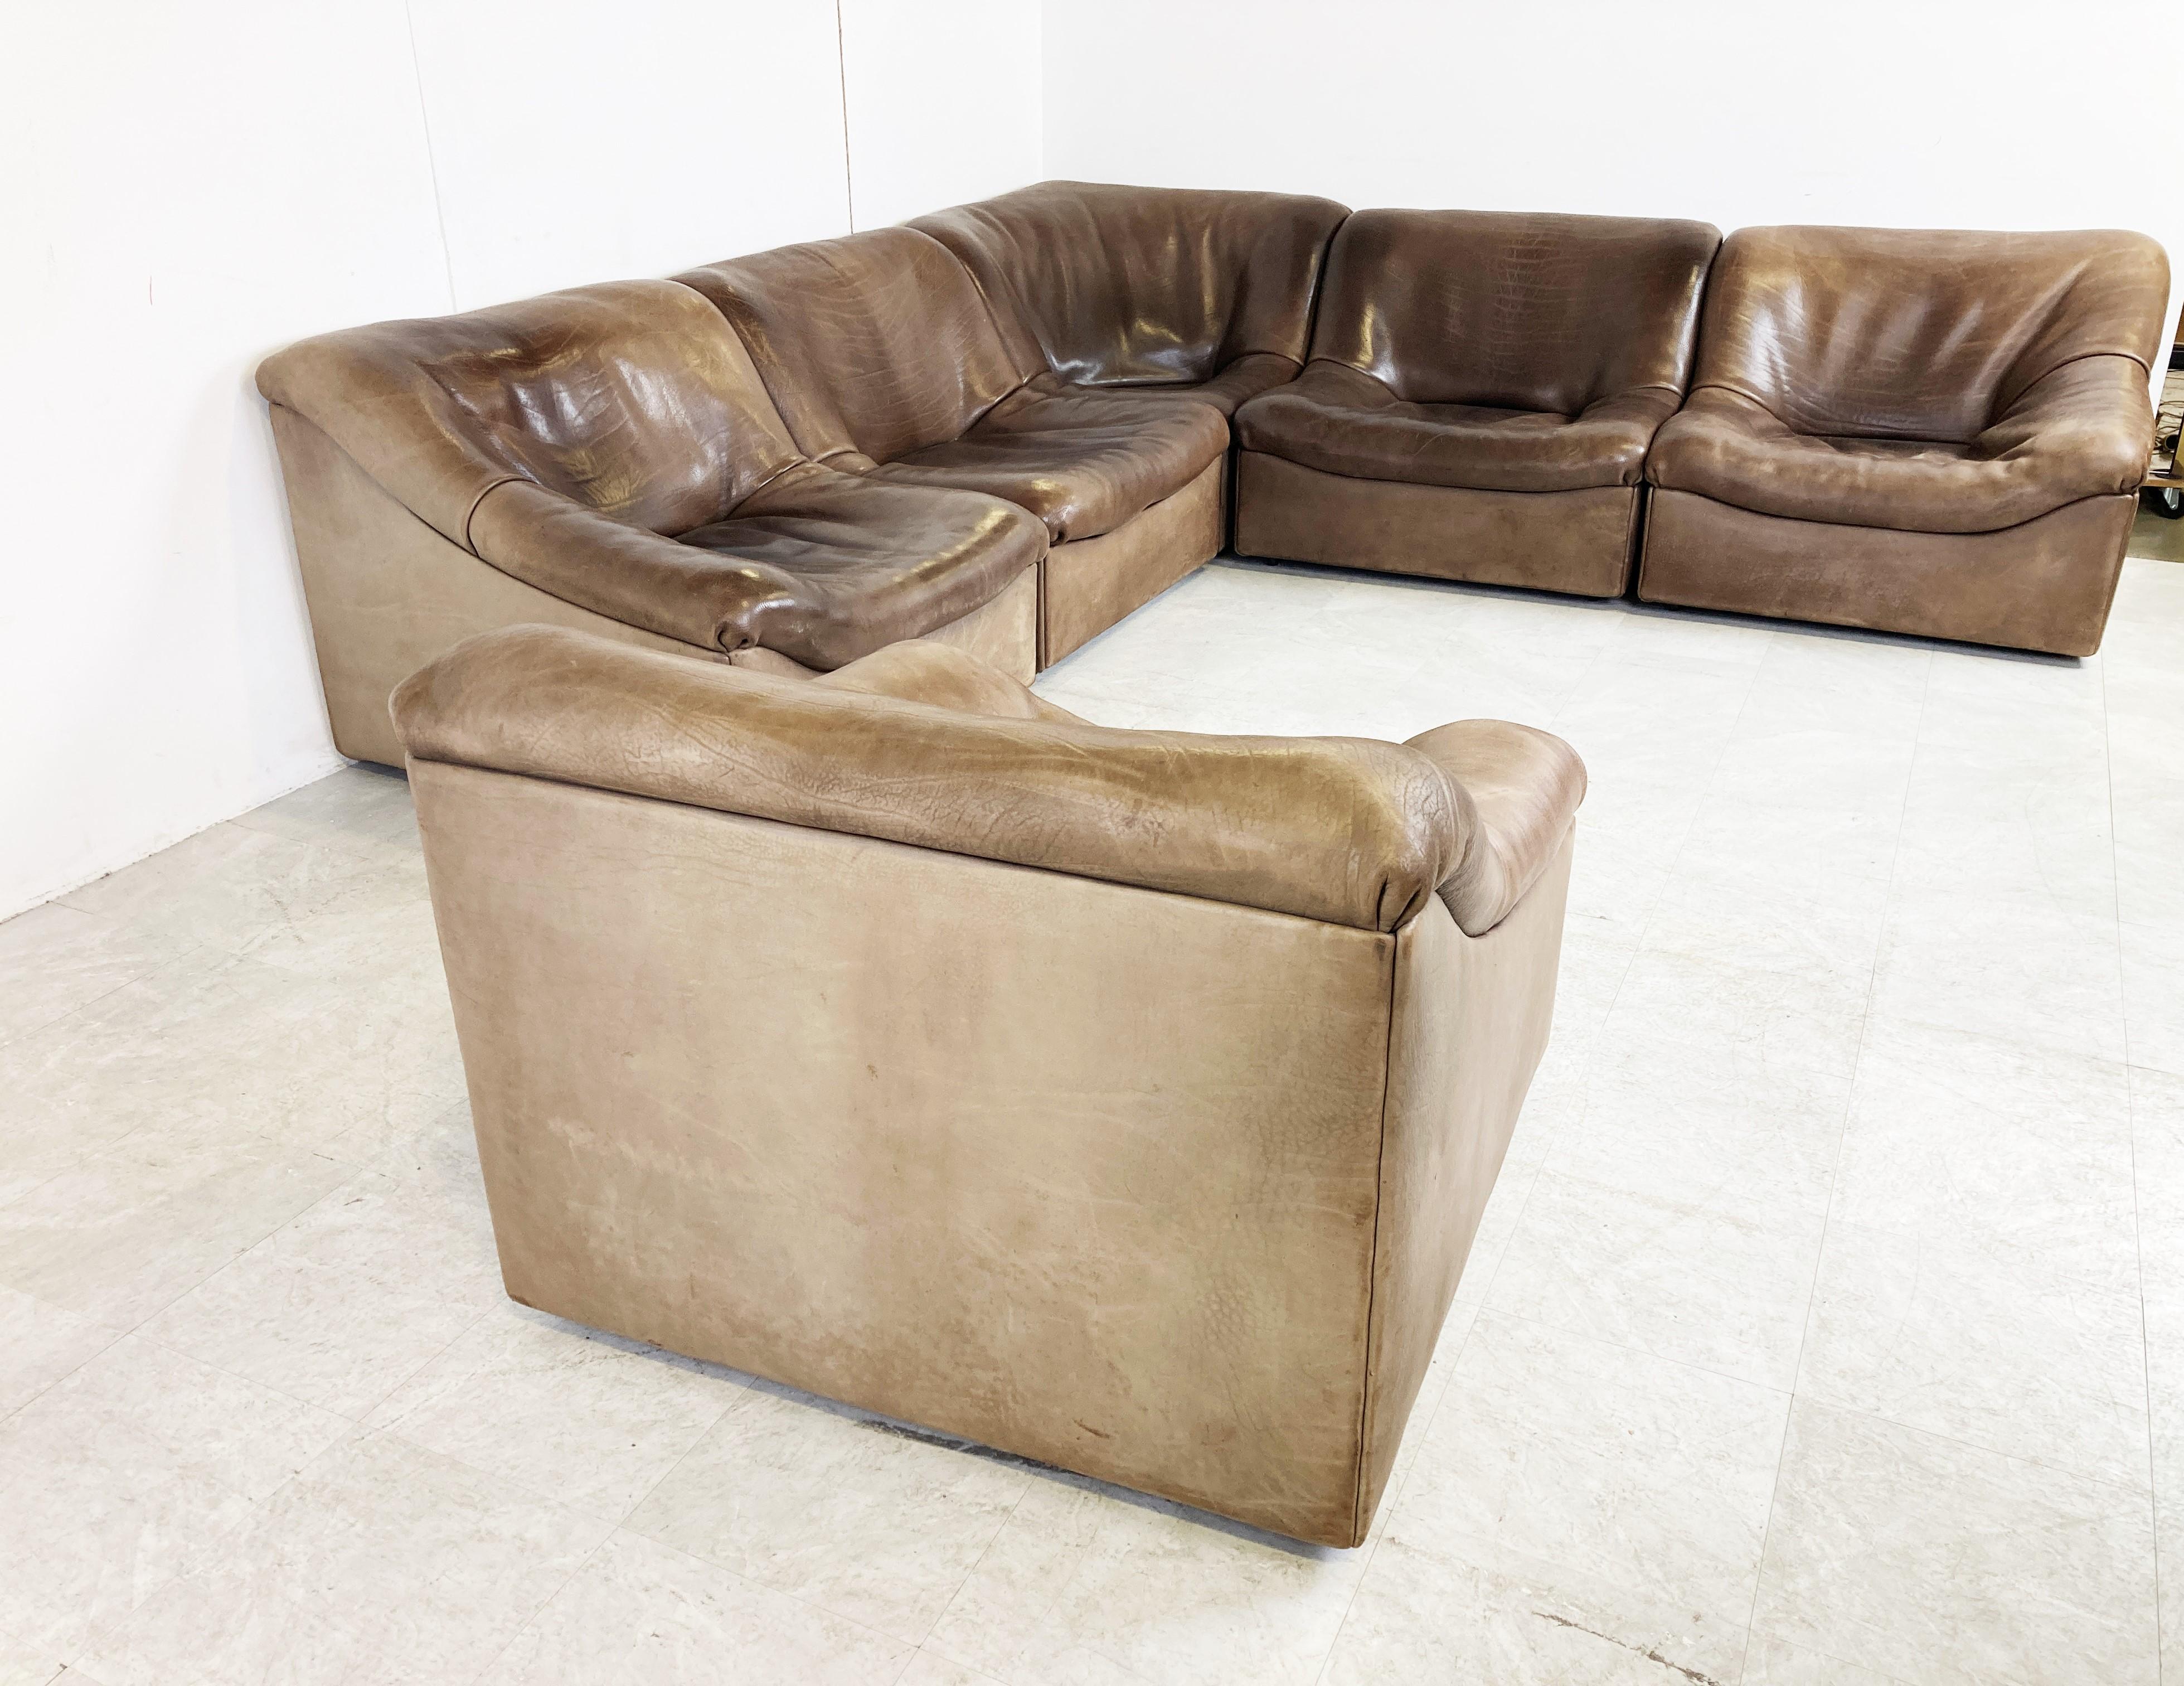 Midcentury thick Buffalo neck leather modular sofas by Desede consisting of 5 elements and a armchair.

Desede stands for pure quality of leather. 

Especially the DS46 has very thick leather upholstery with a beautiful patina.

The sofa set